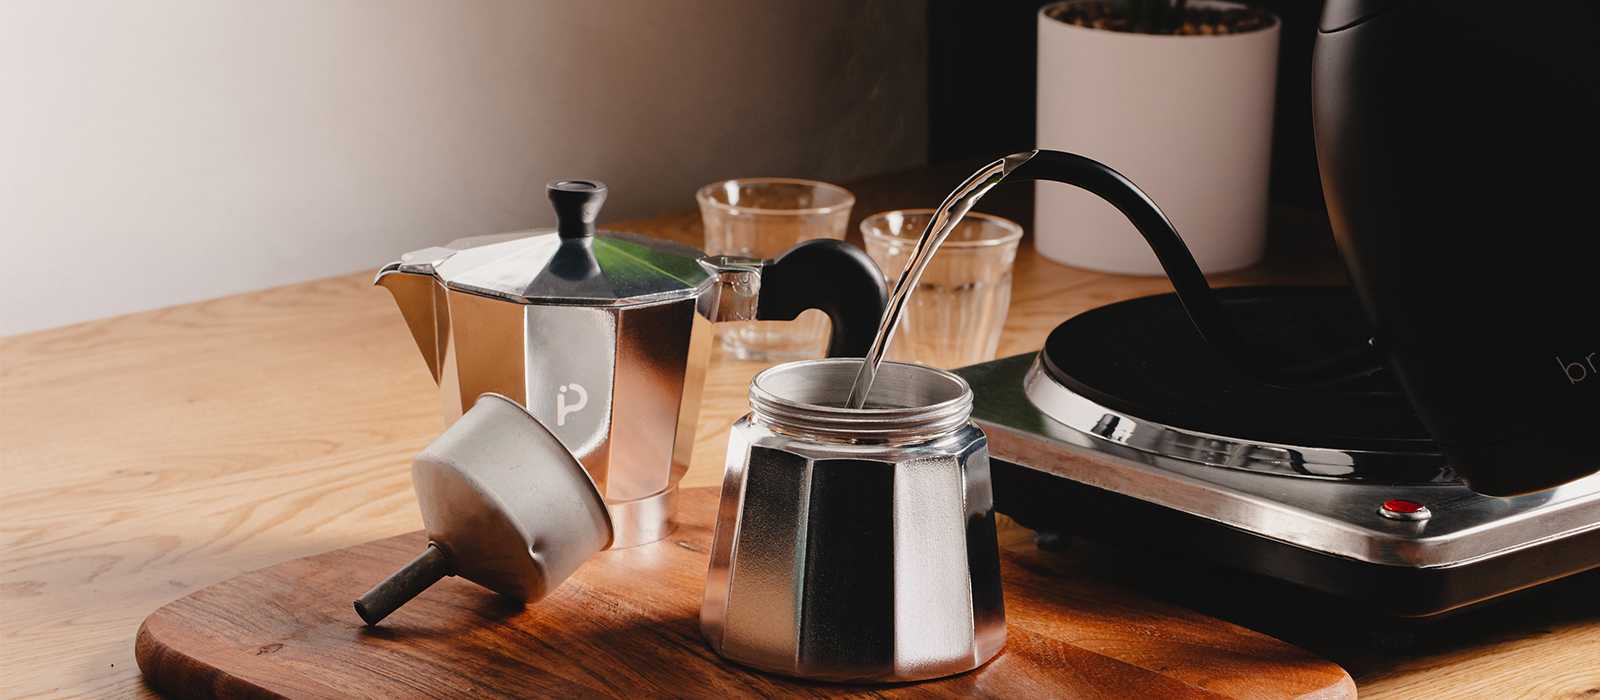 Alessi moka pot review: Why it's a must-have for coffee lovers